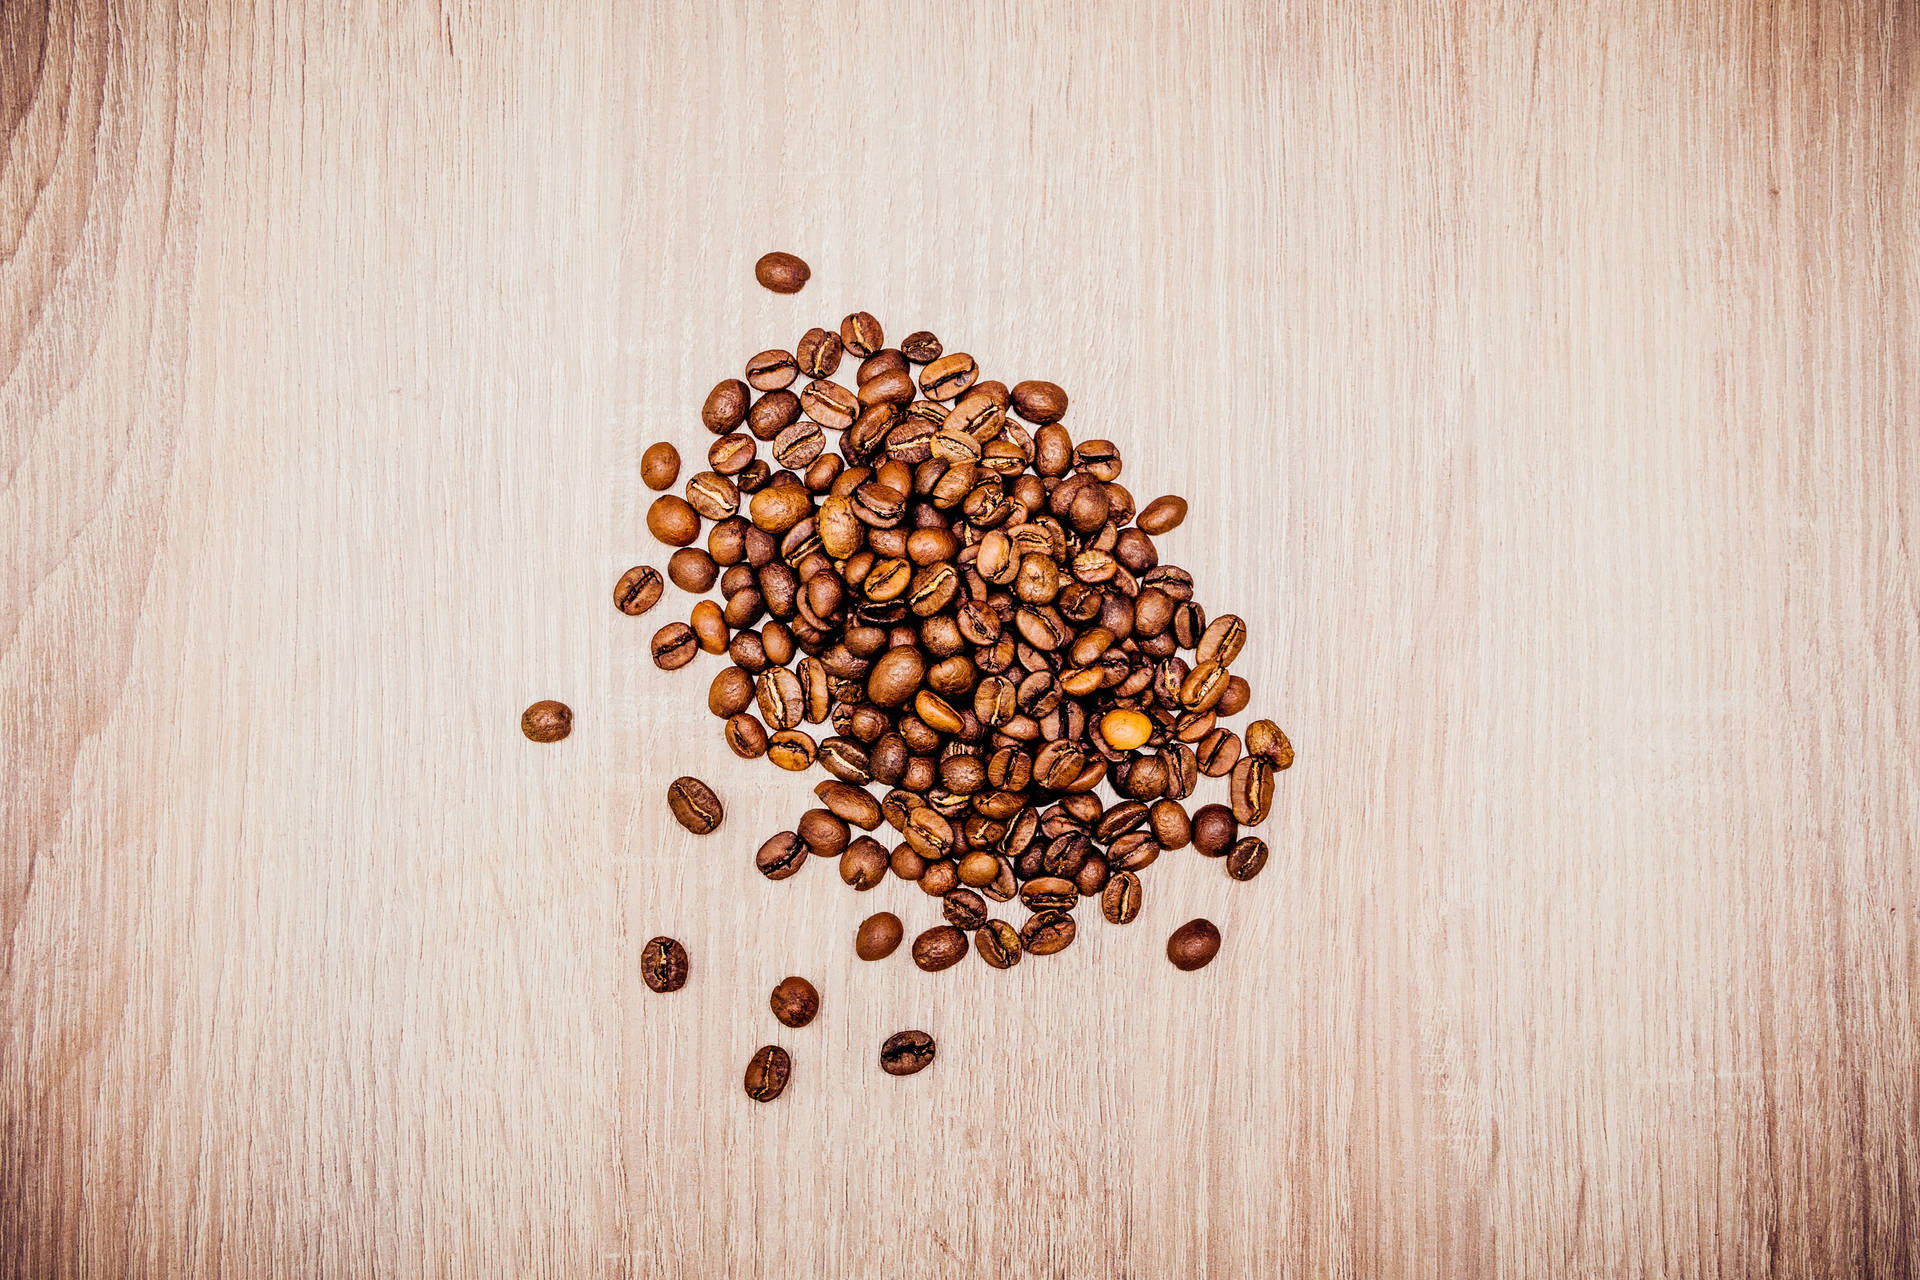 Freshly Roasted Coffee Beans from the Mount! Wallpaper